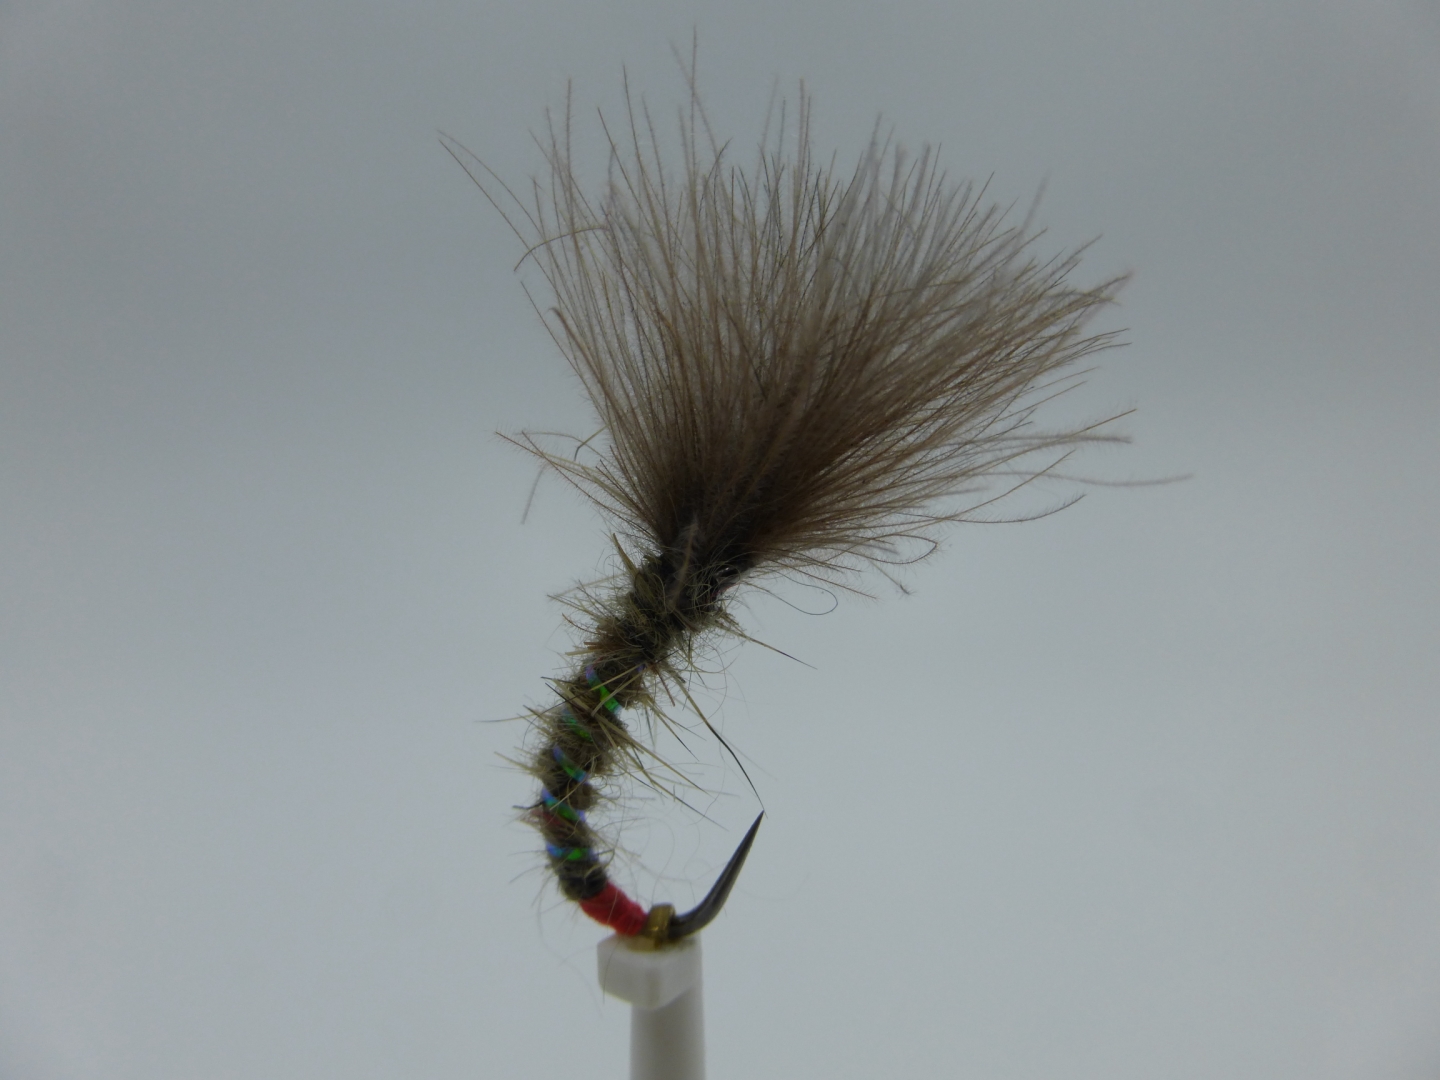 Size 16 CDC Owl Hare,s Ear Barbless